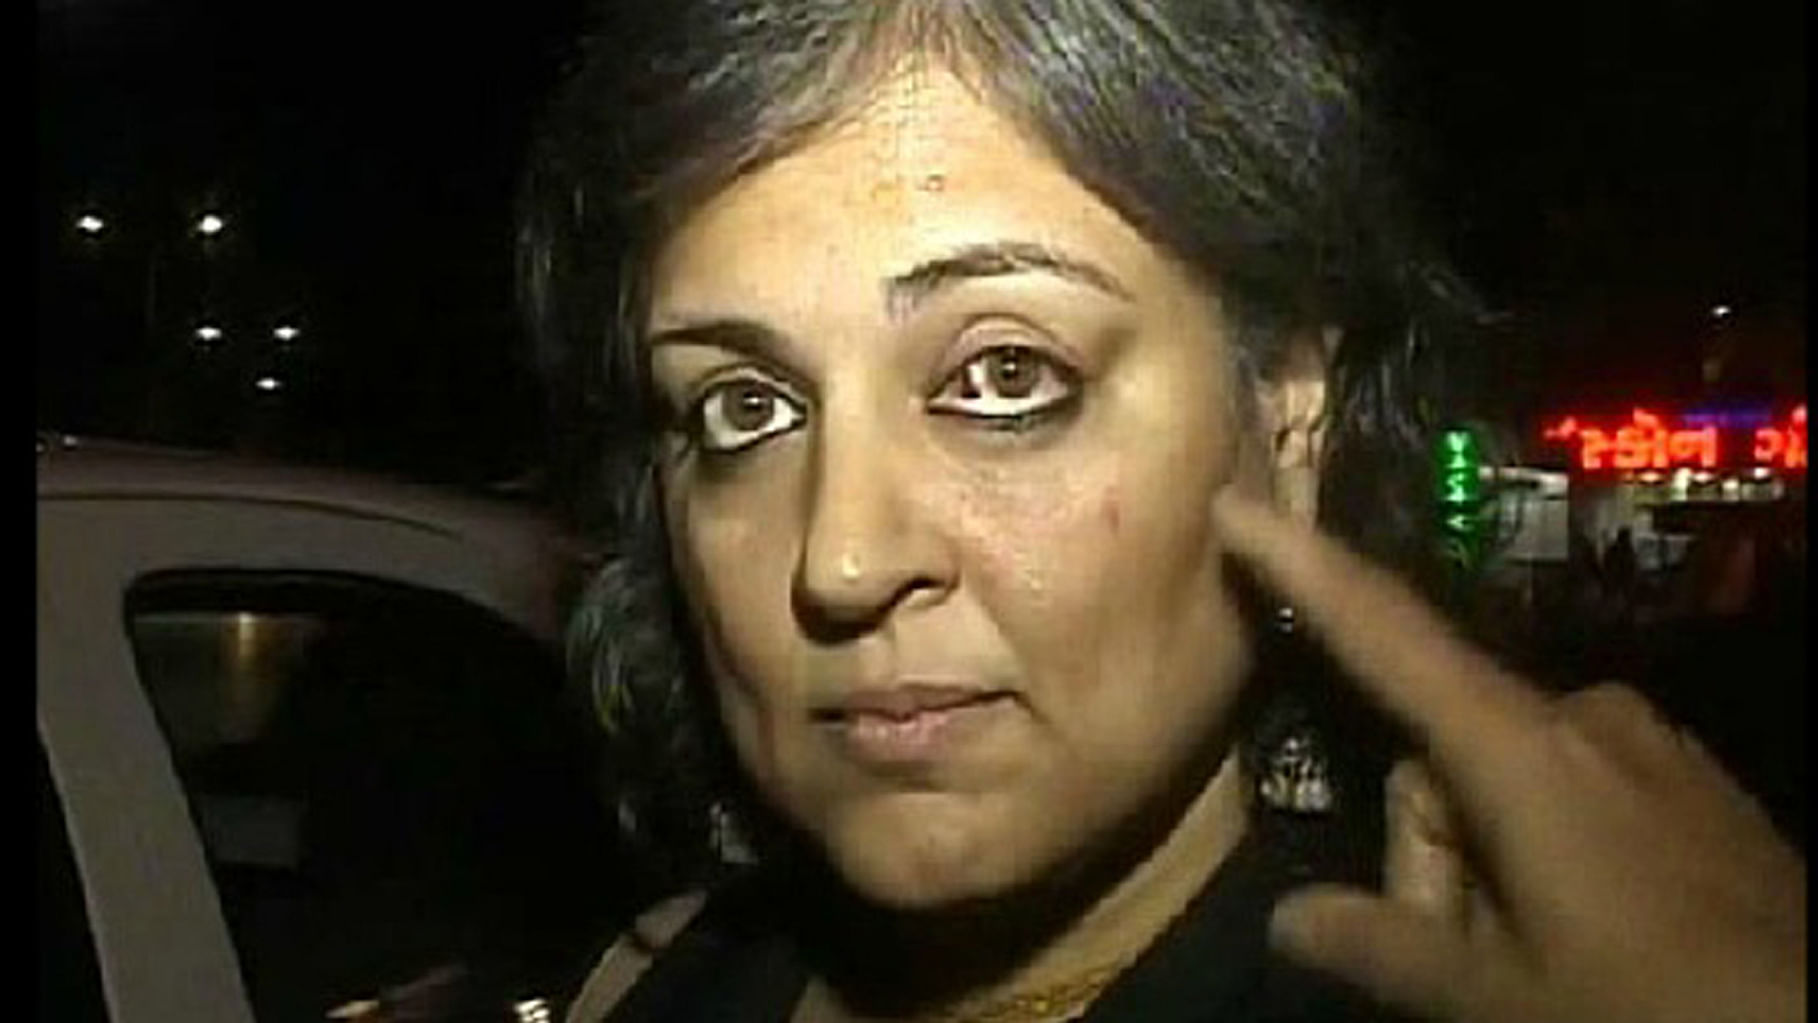 Journalist Revati Laul shows the clot in her eye and hand marks on her face. (Photo: ANI screengrab)